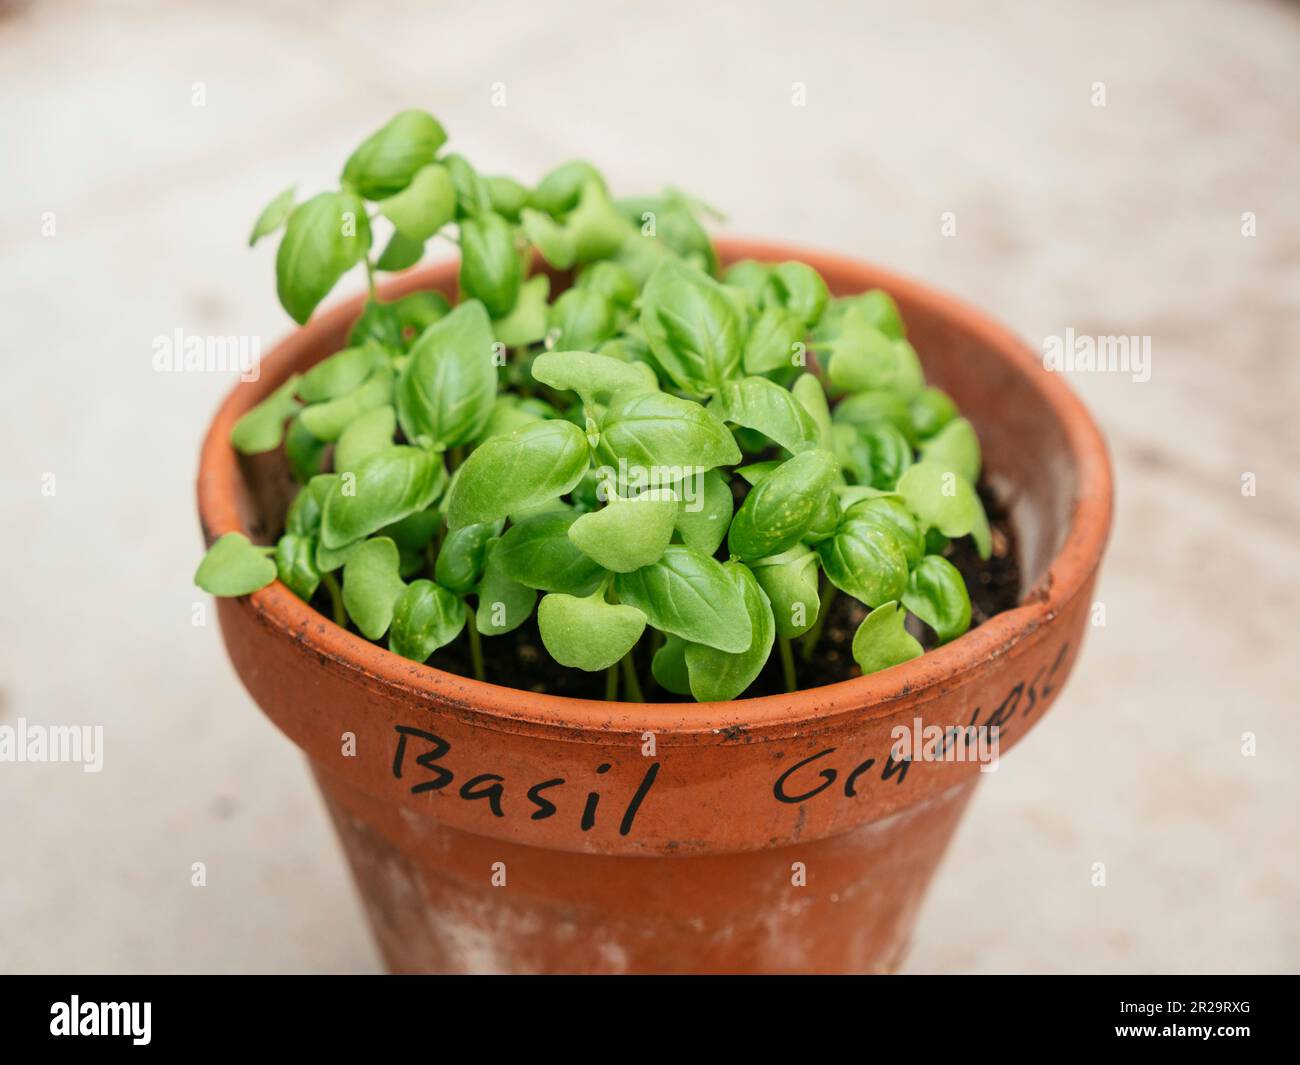 Genovese basil growing in a terra-cotta pot. Stock Photo